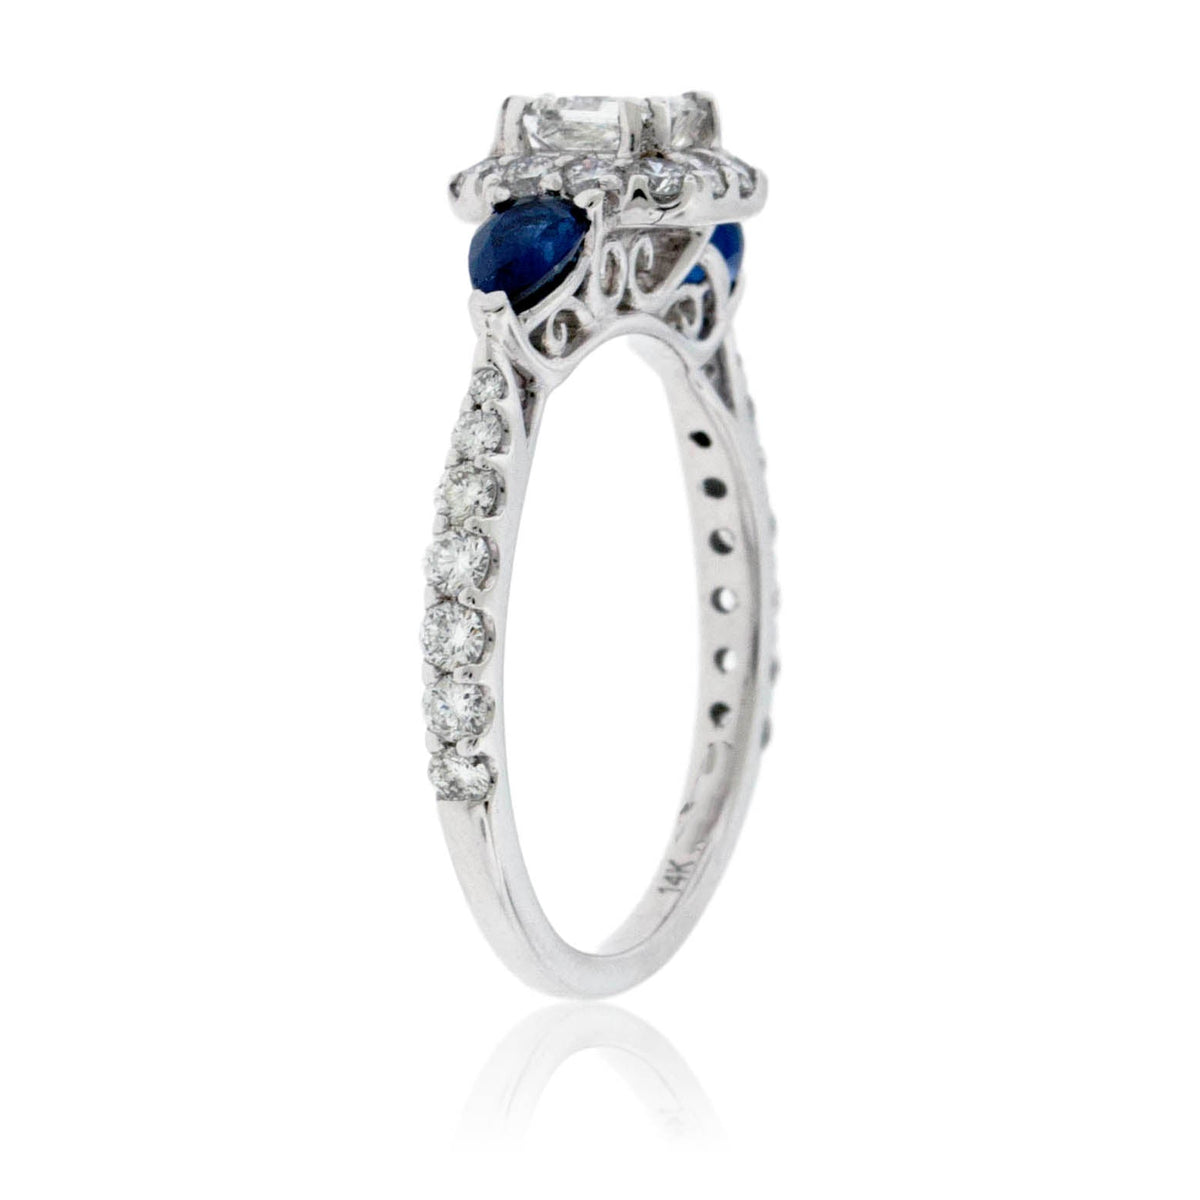 Diamond Engagement Wedding Ring with Sapphire Accents - Park City Jewelers